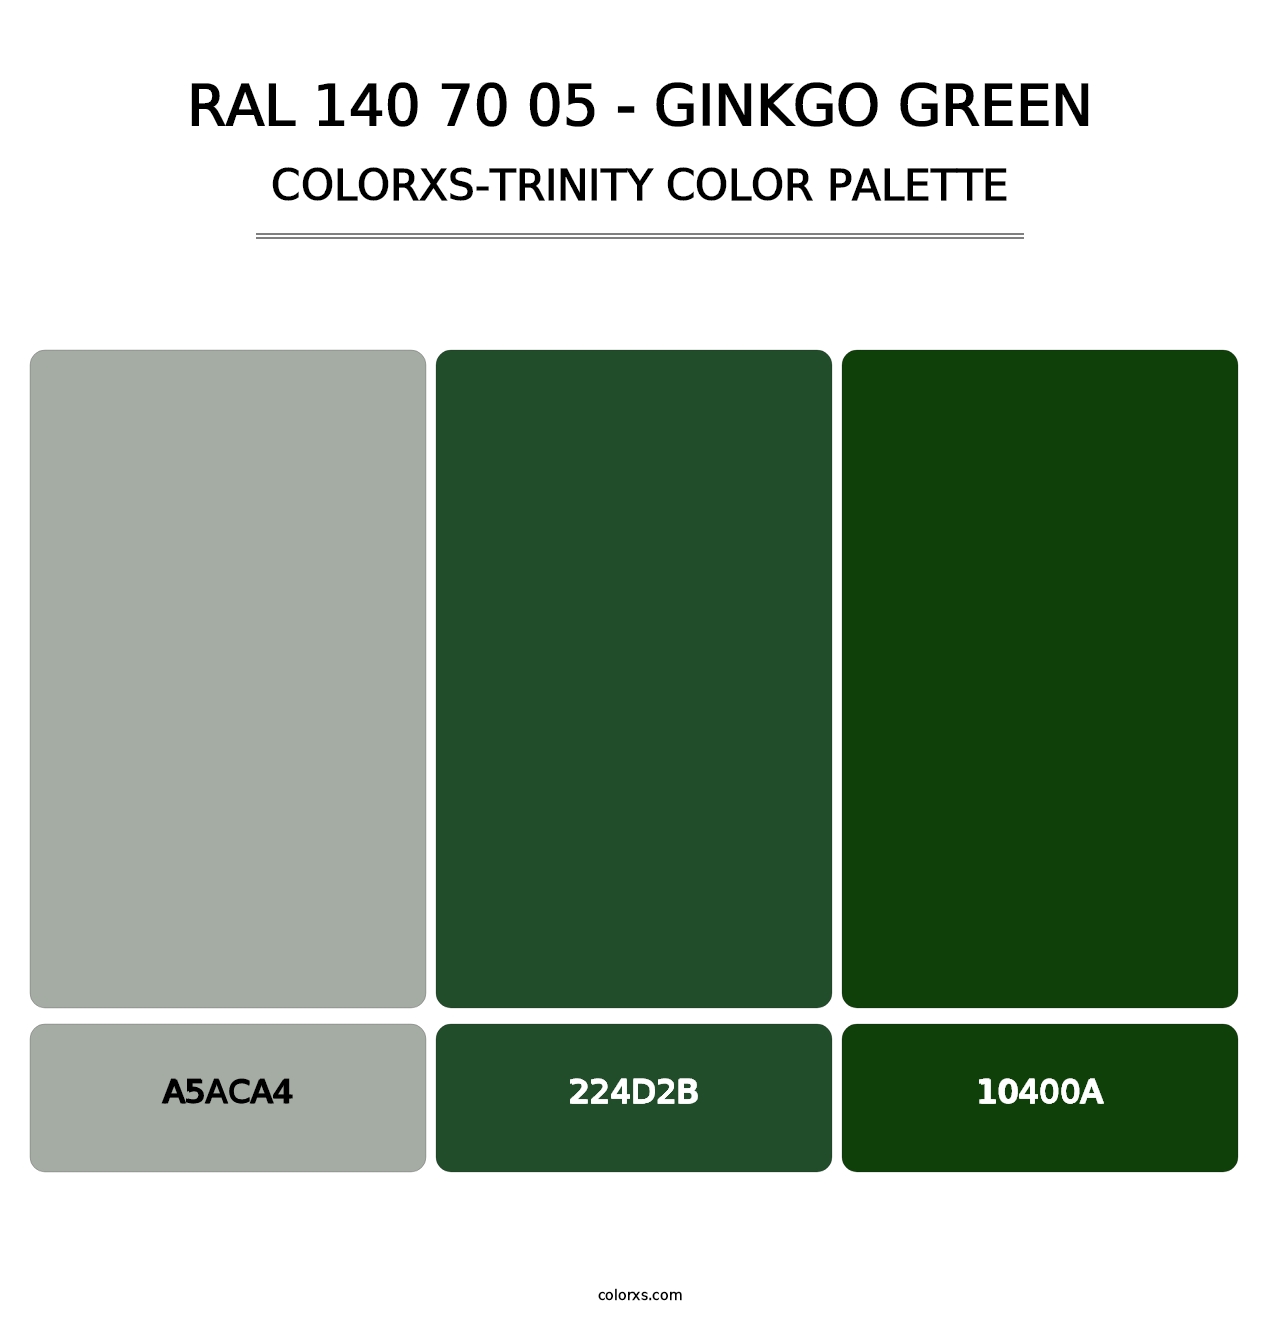 RAL 140 70 05 - Ginkgo Green - Colorxs Trinity Palette